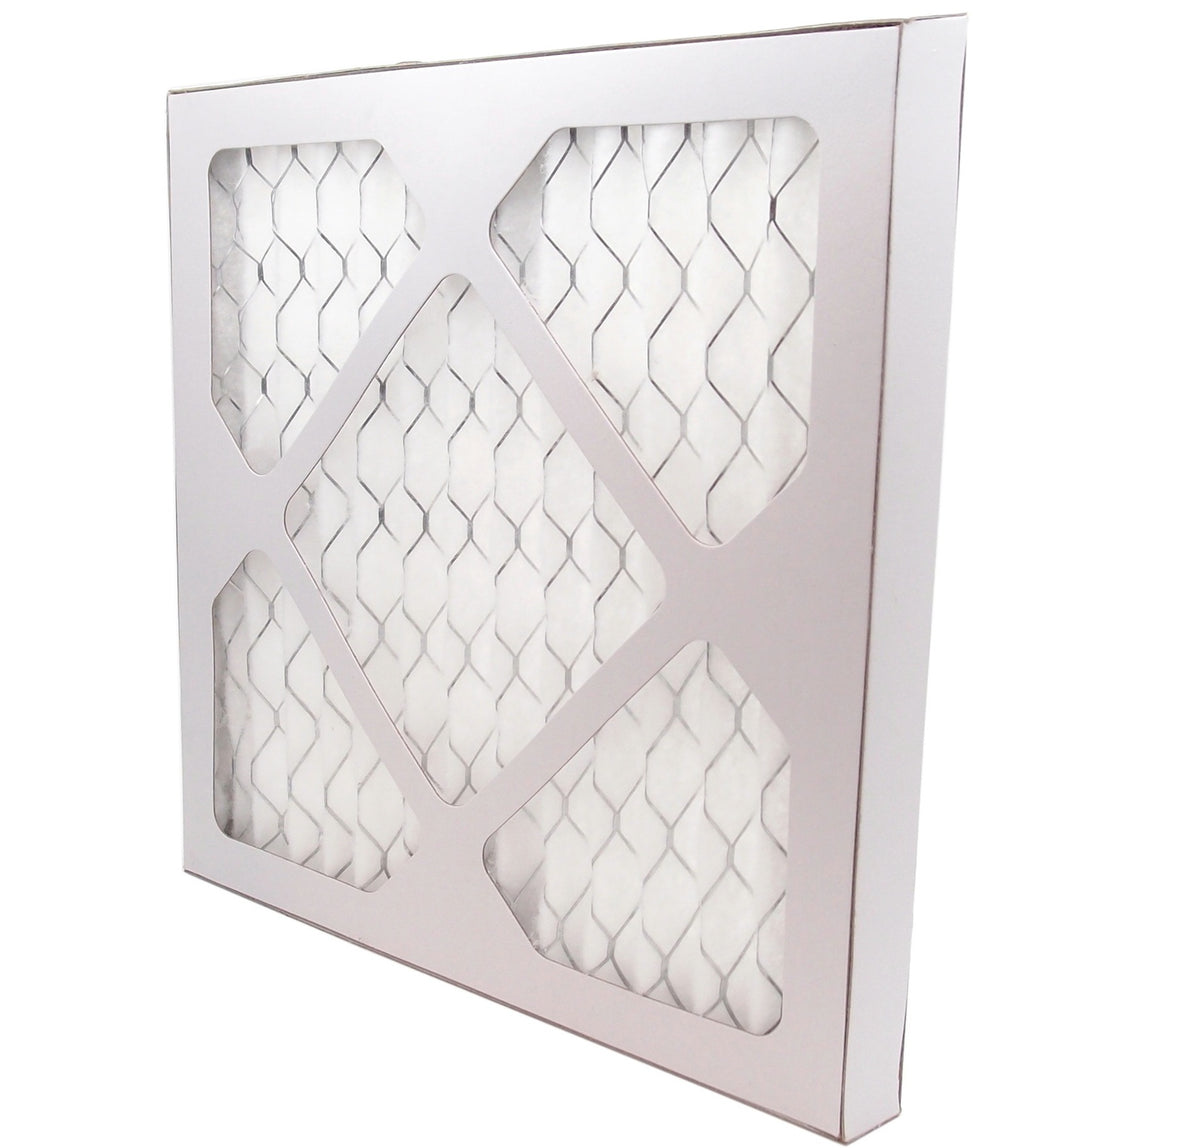 14&quot; x 25&quot; Pleated MERV 8 Filter for HVAC Return Filter Grille